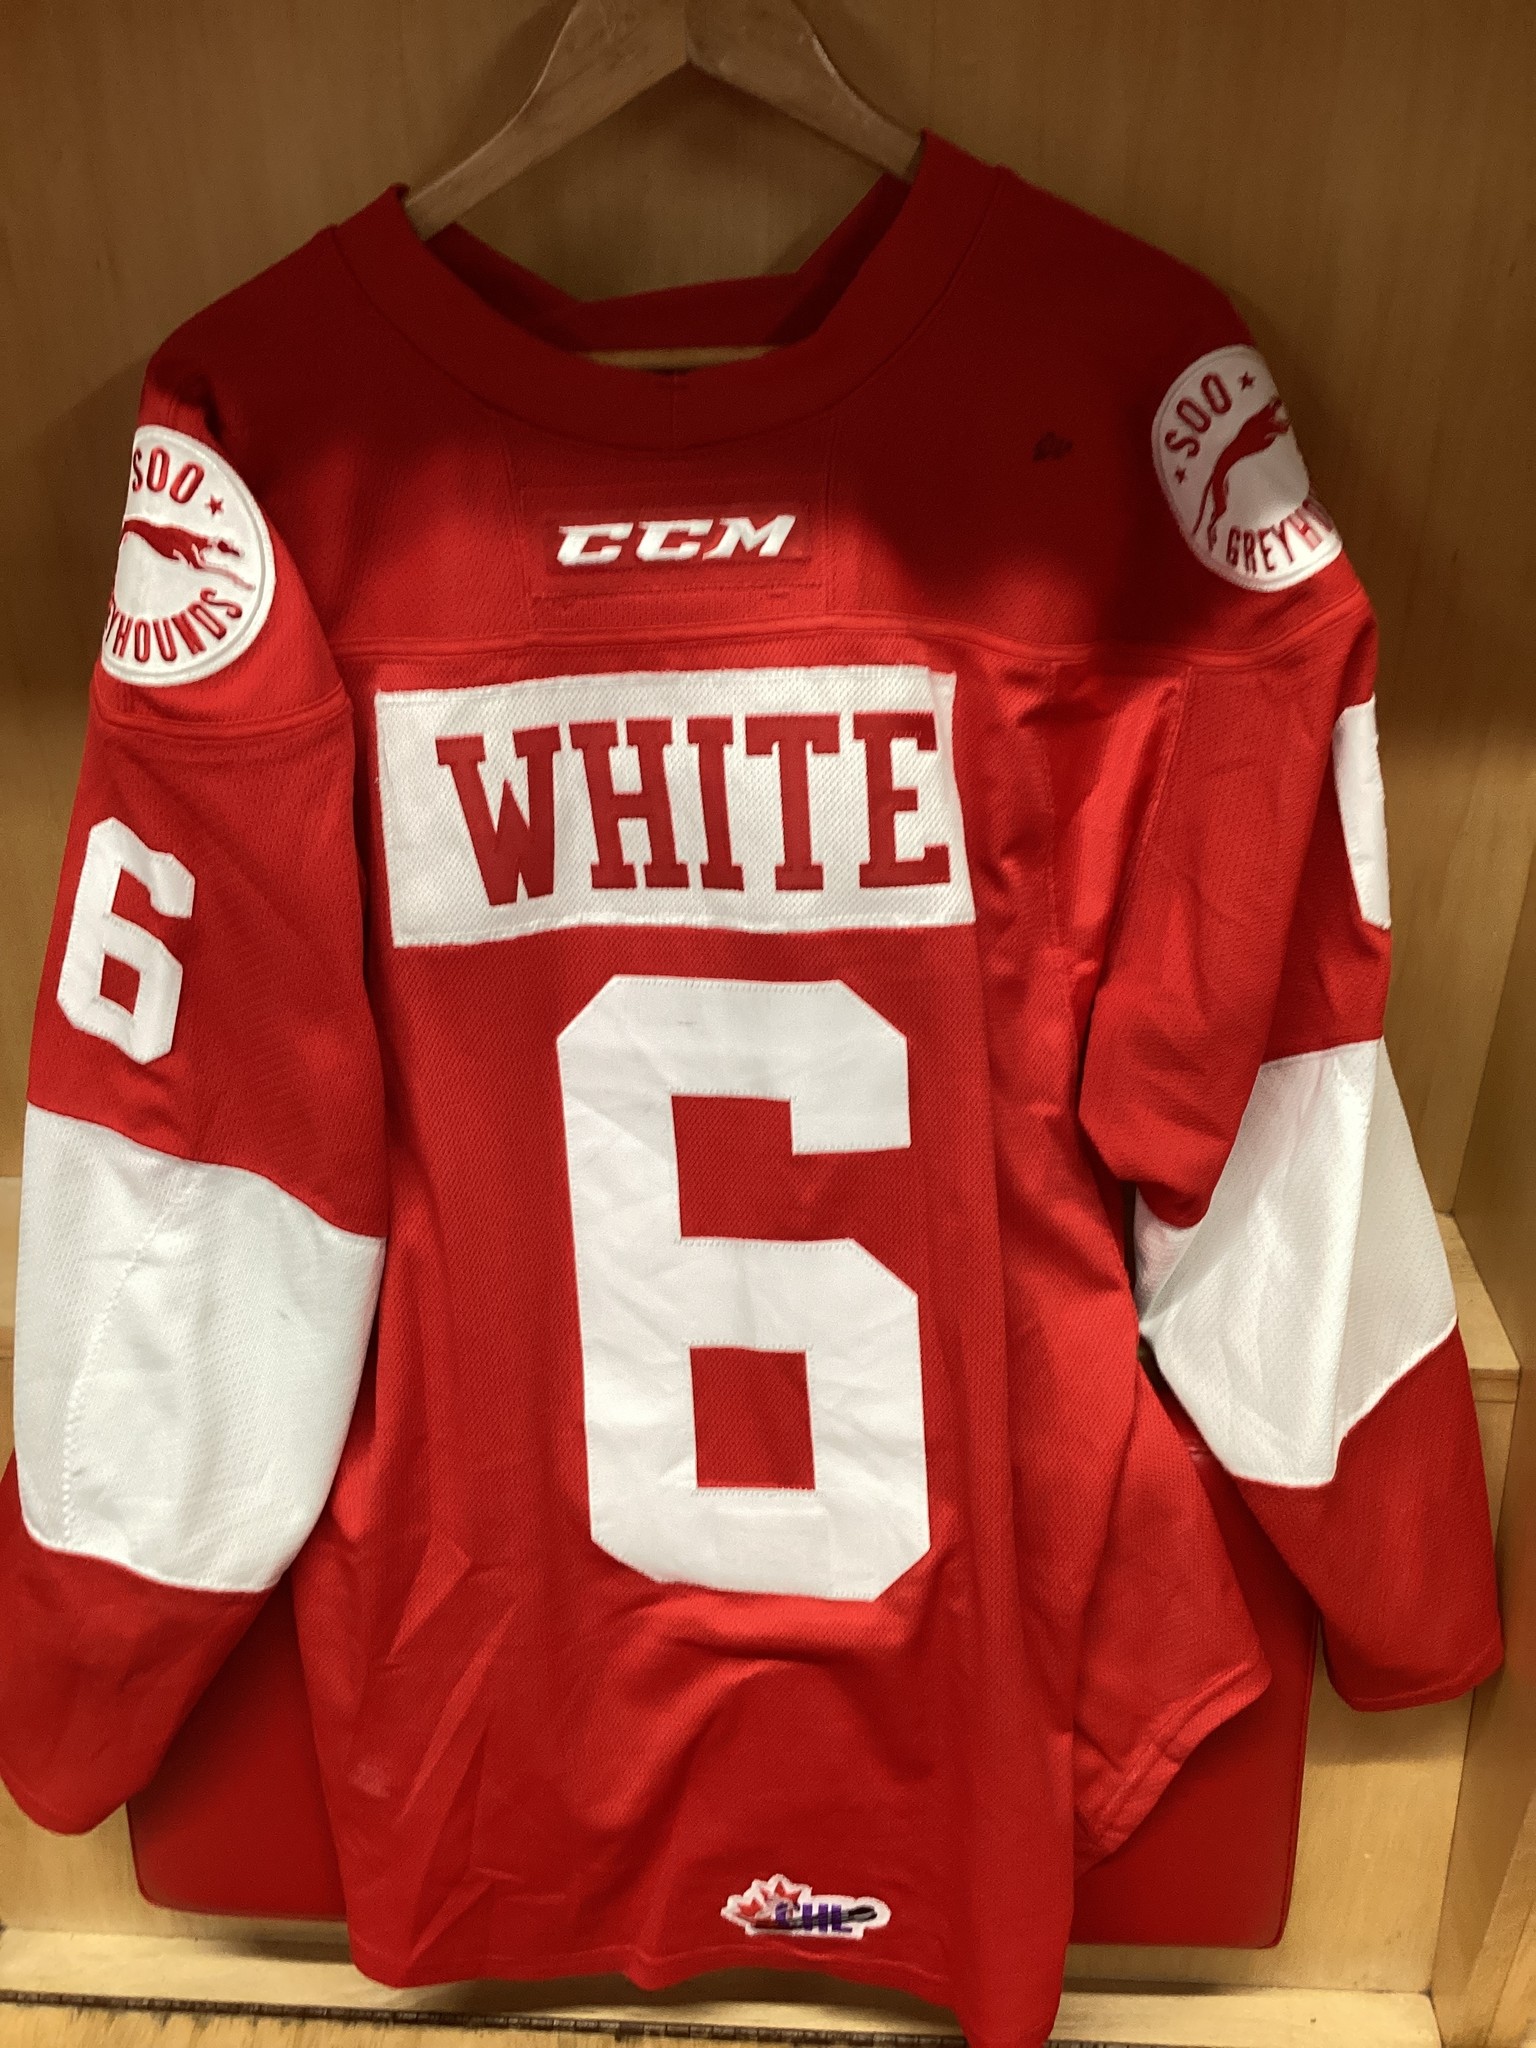 Colton White 3rd jersey 15/16 Game Worn